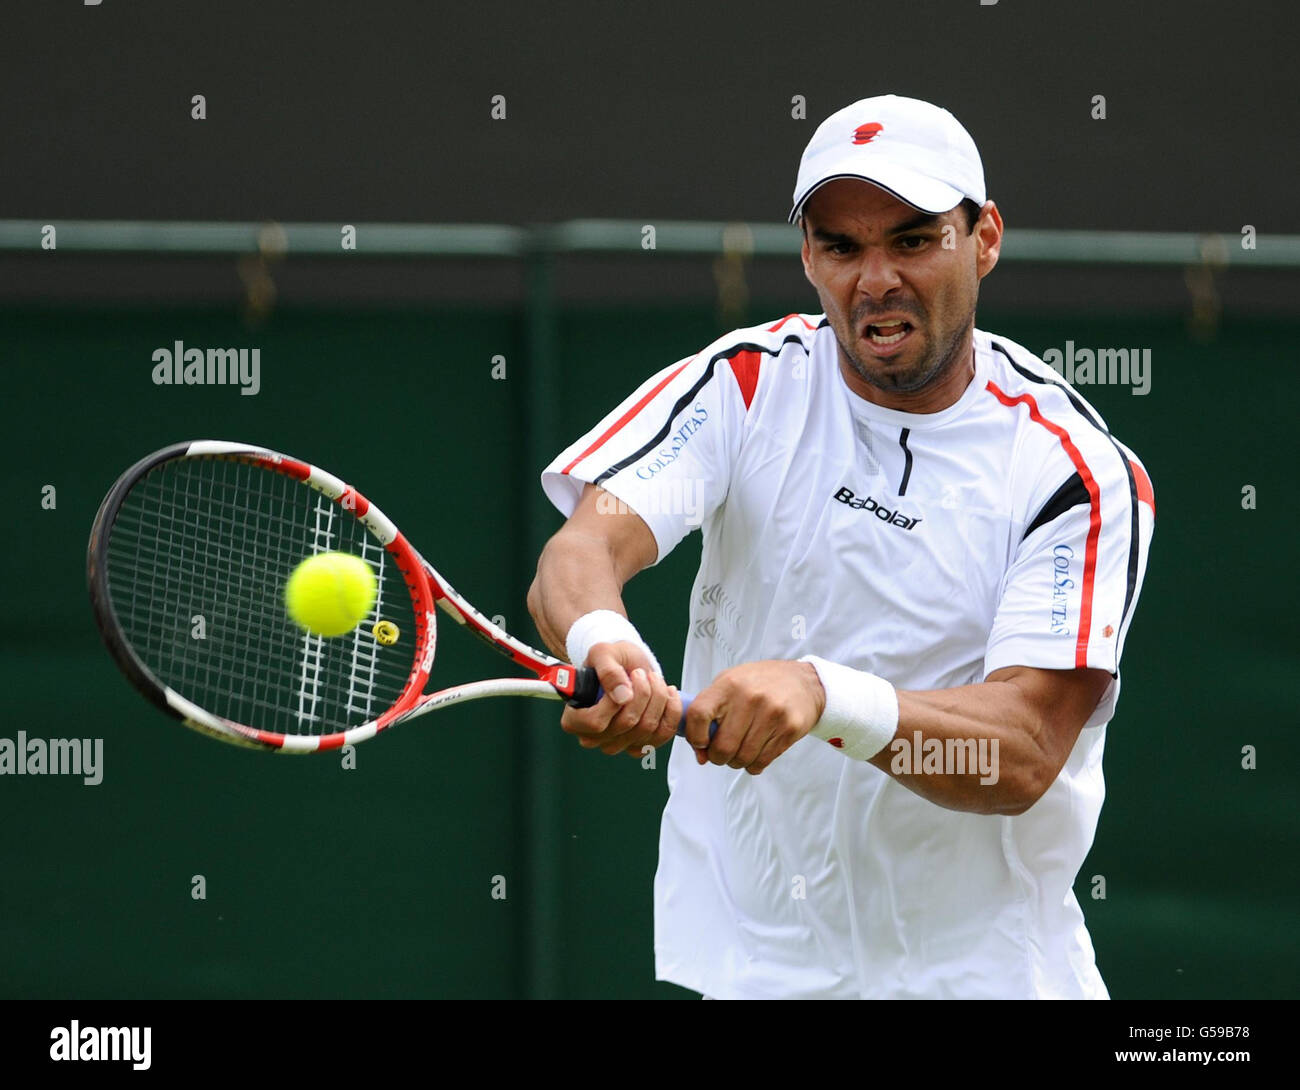 Colombia's Alejandro Falla in action against USA's John Isner during day one of the 2012 Wimbledon Championships at the All England Lawn Tennis Club, Wimbledon. Stock Photo